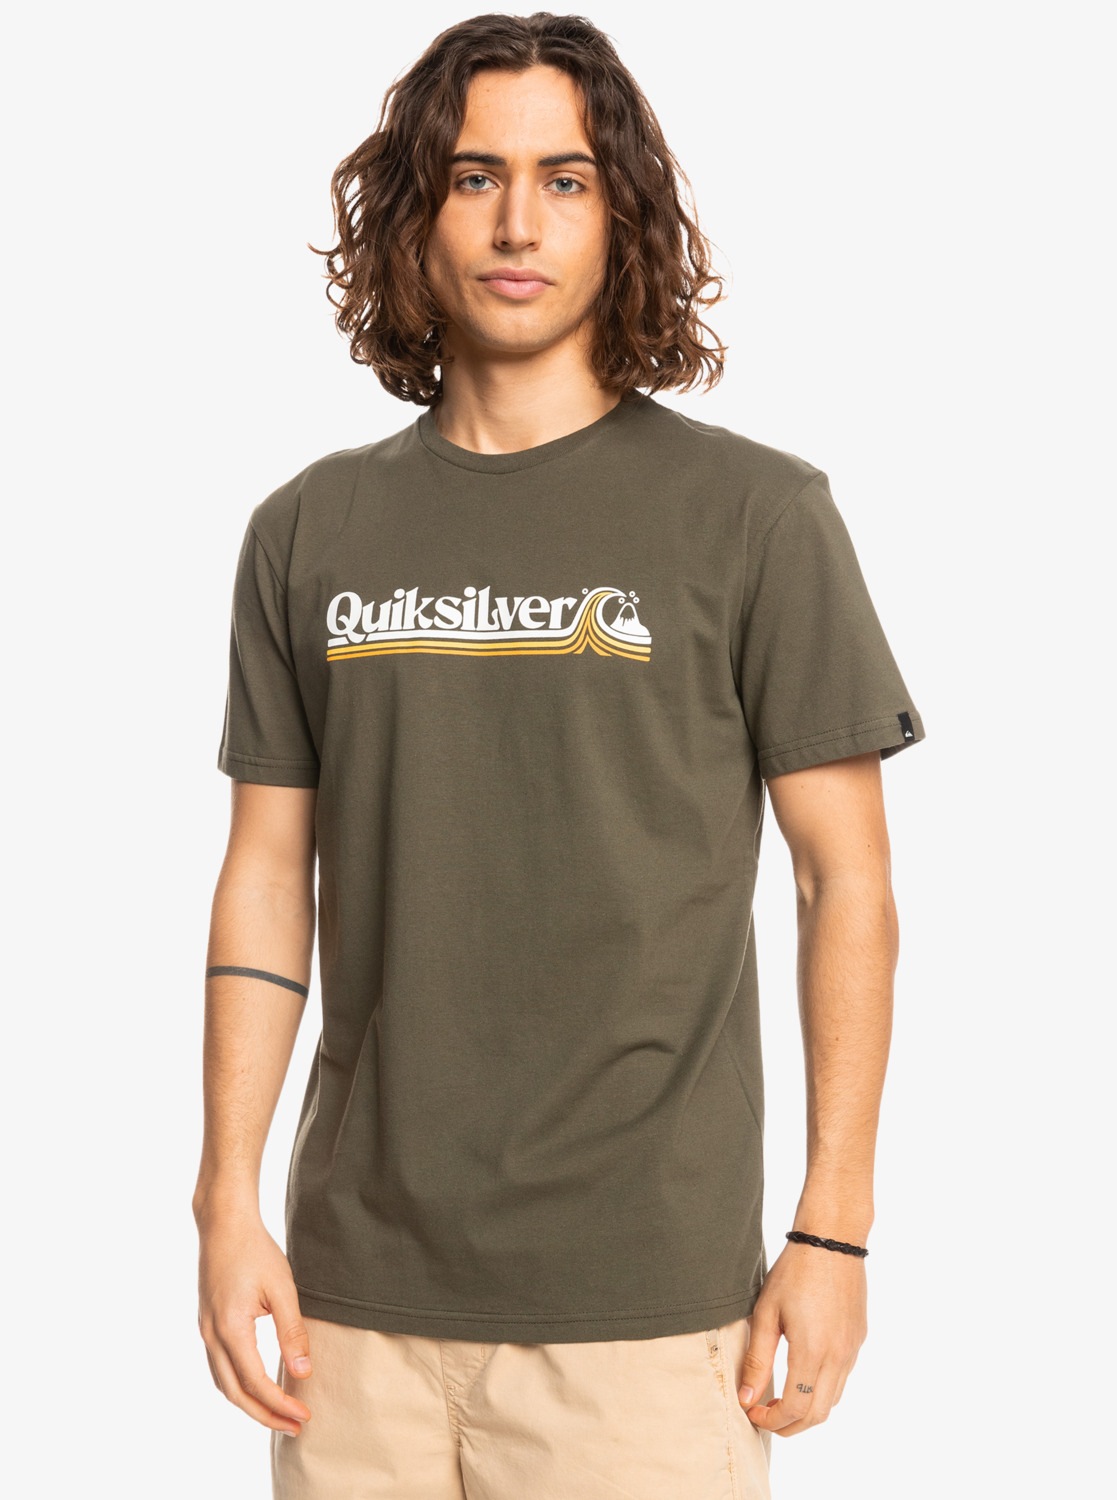 Quiksilver T-Shirt »All Lined Up« von Quiksilver